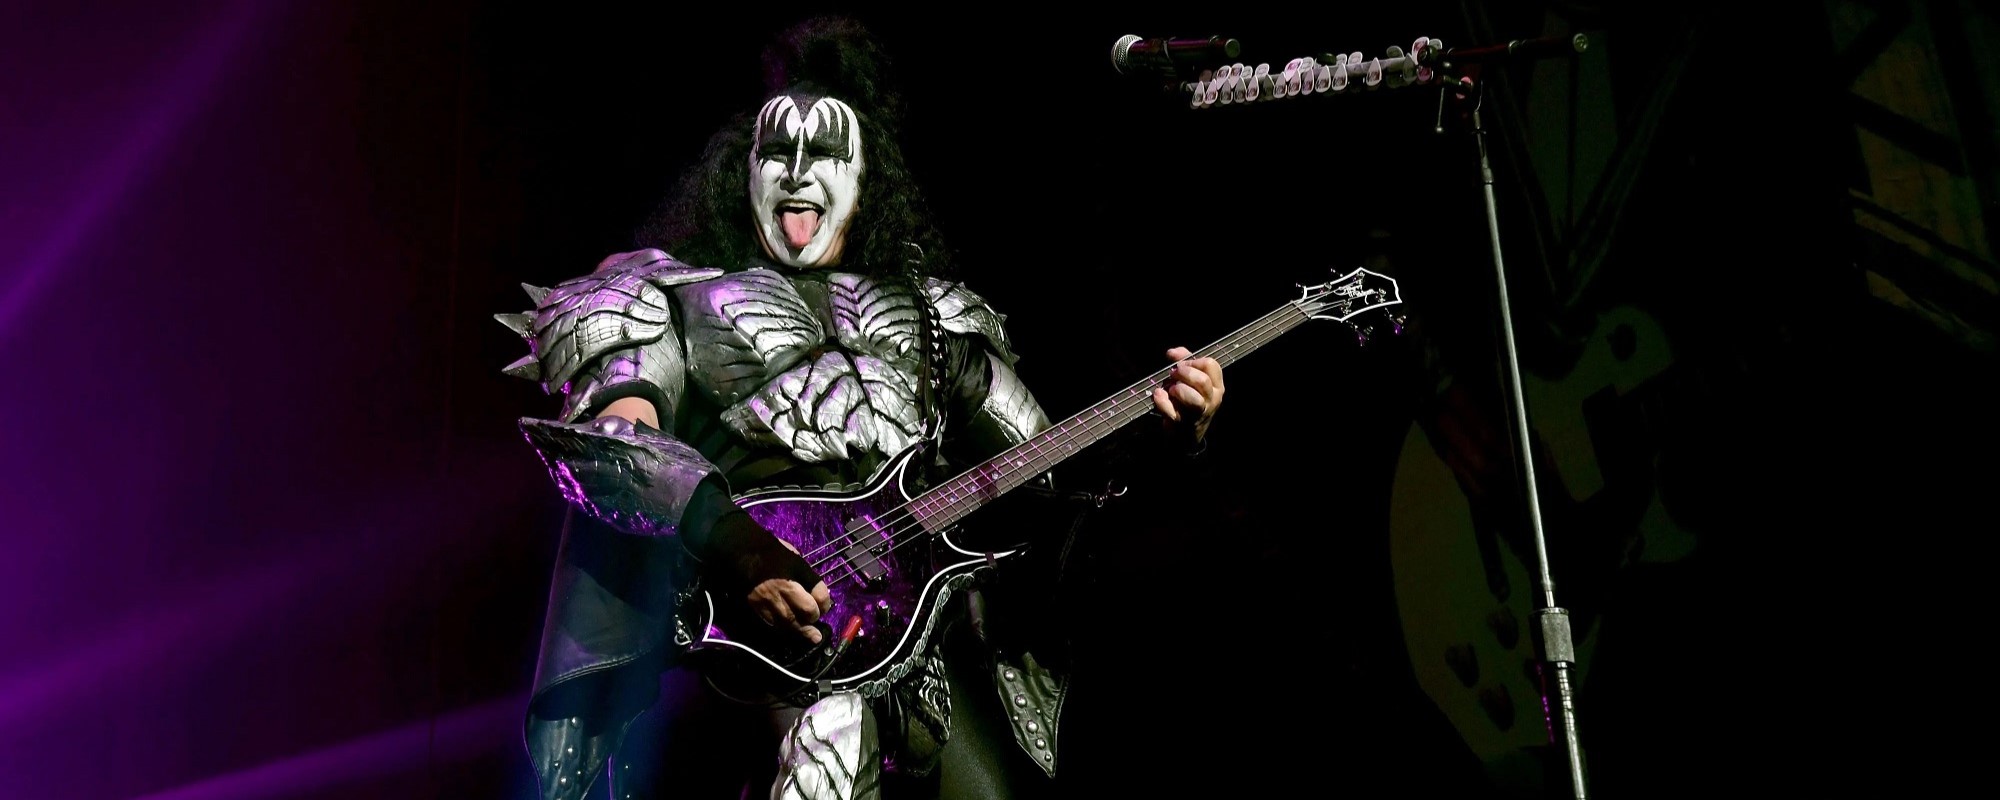 KISS’ Gene Simmons Delivers Special Fan Experience at Electric Lady Studios: “This Is Only the Beginning”